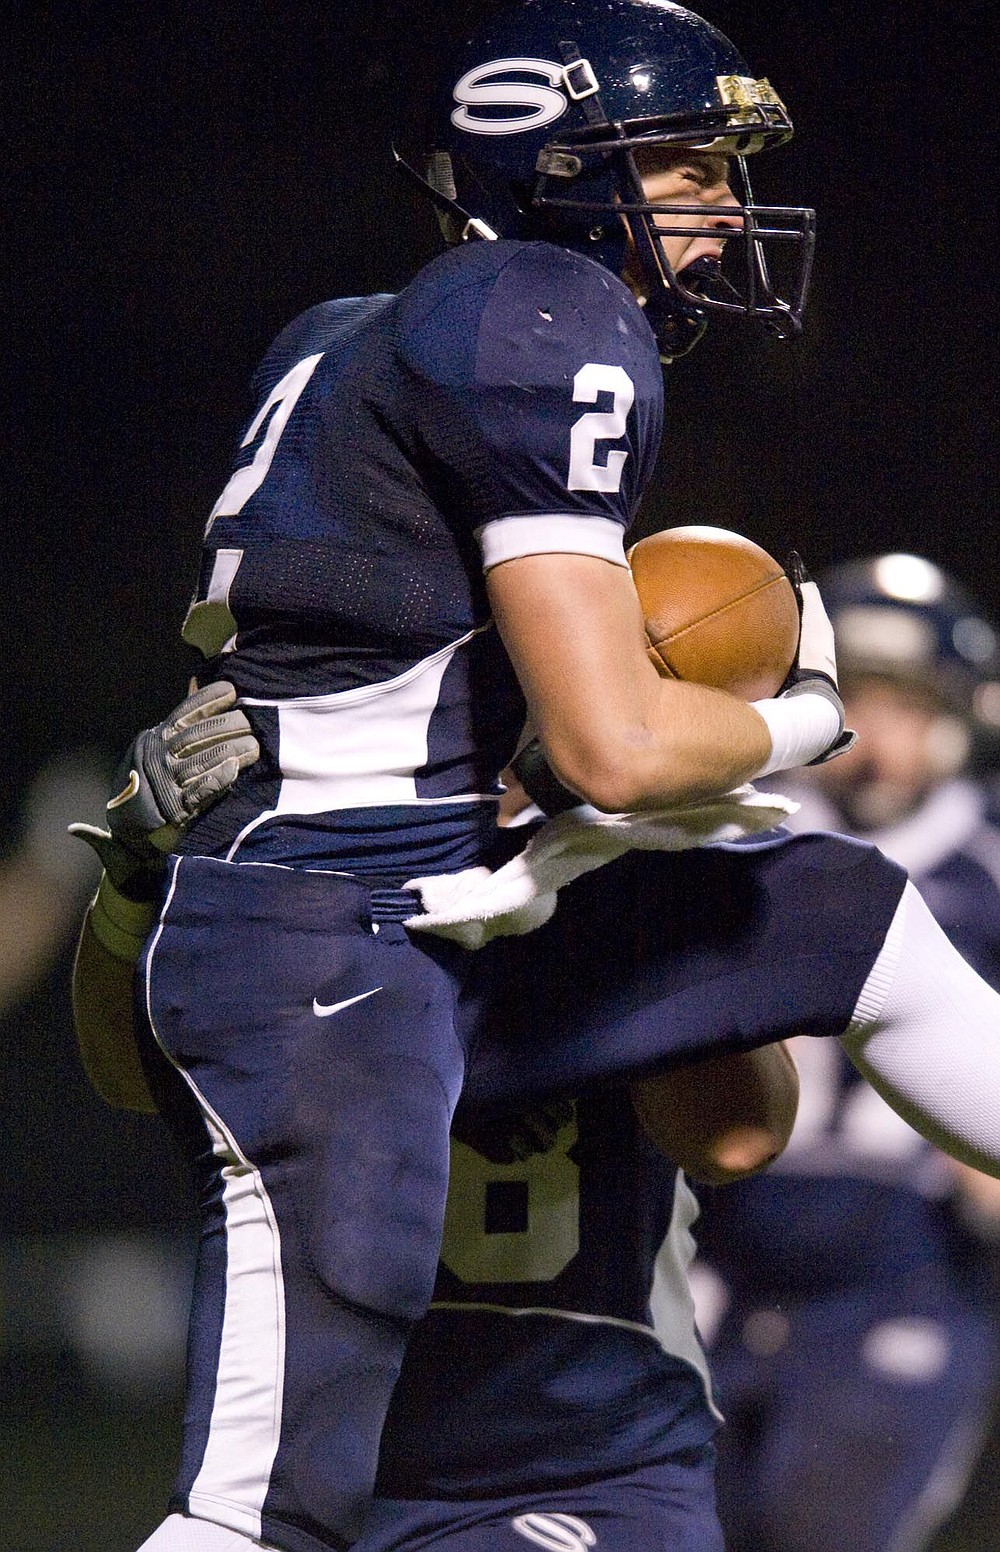 Zachary Kaufman/The Columbian
Ian Zarosinski and the Skyview football team have had a lot to celebrate during the postseason. In two playoffs games at Kiggins Bowl this month, the Storm have outscored opponents 96-35.